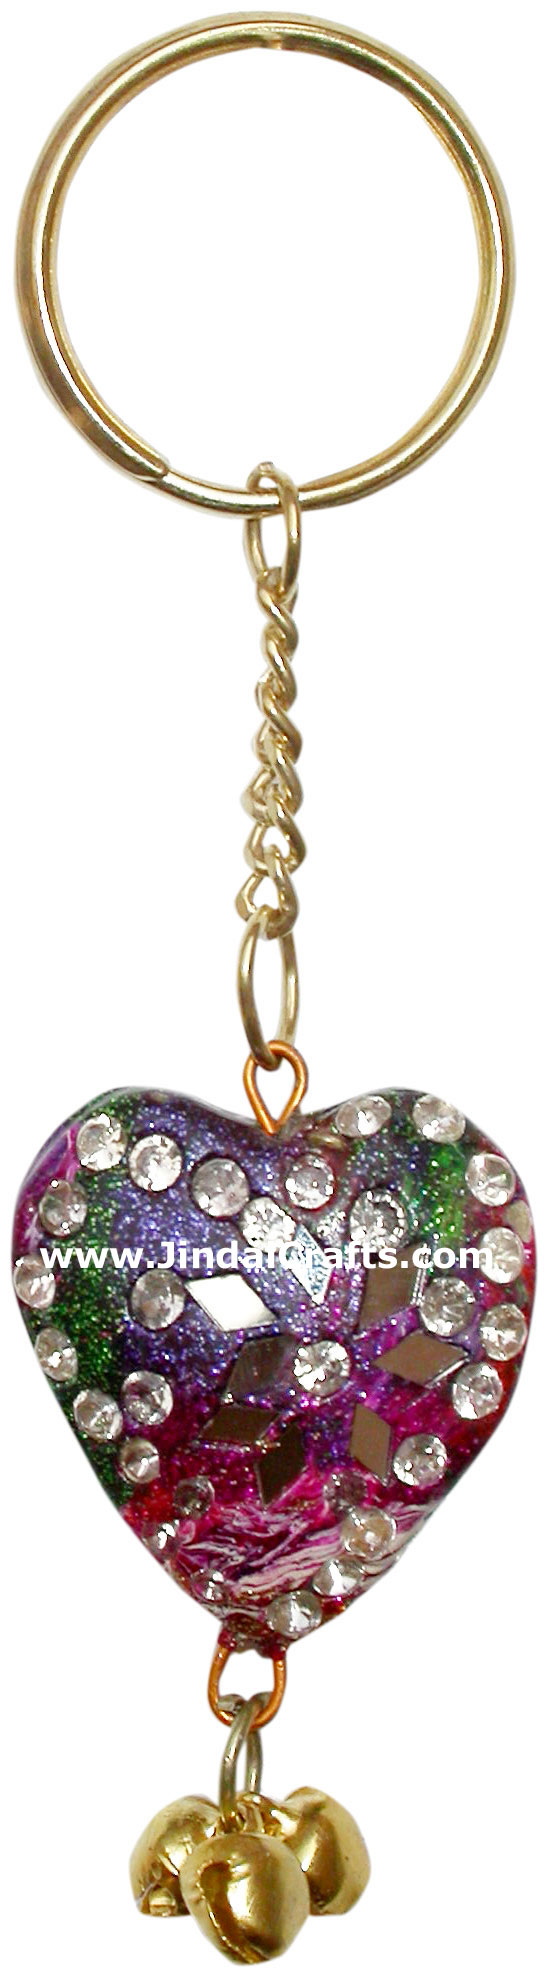 Heart - Hand made Lac Work Key Chain Ring India Art